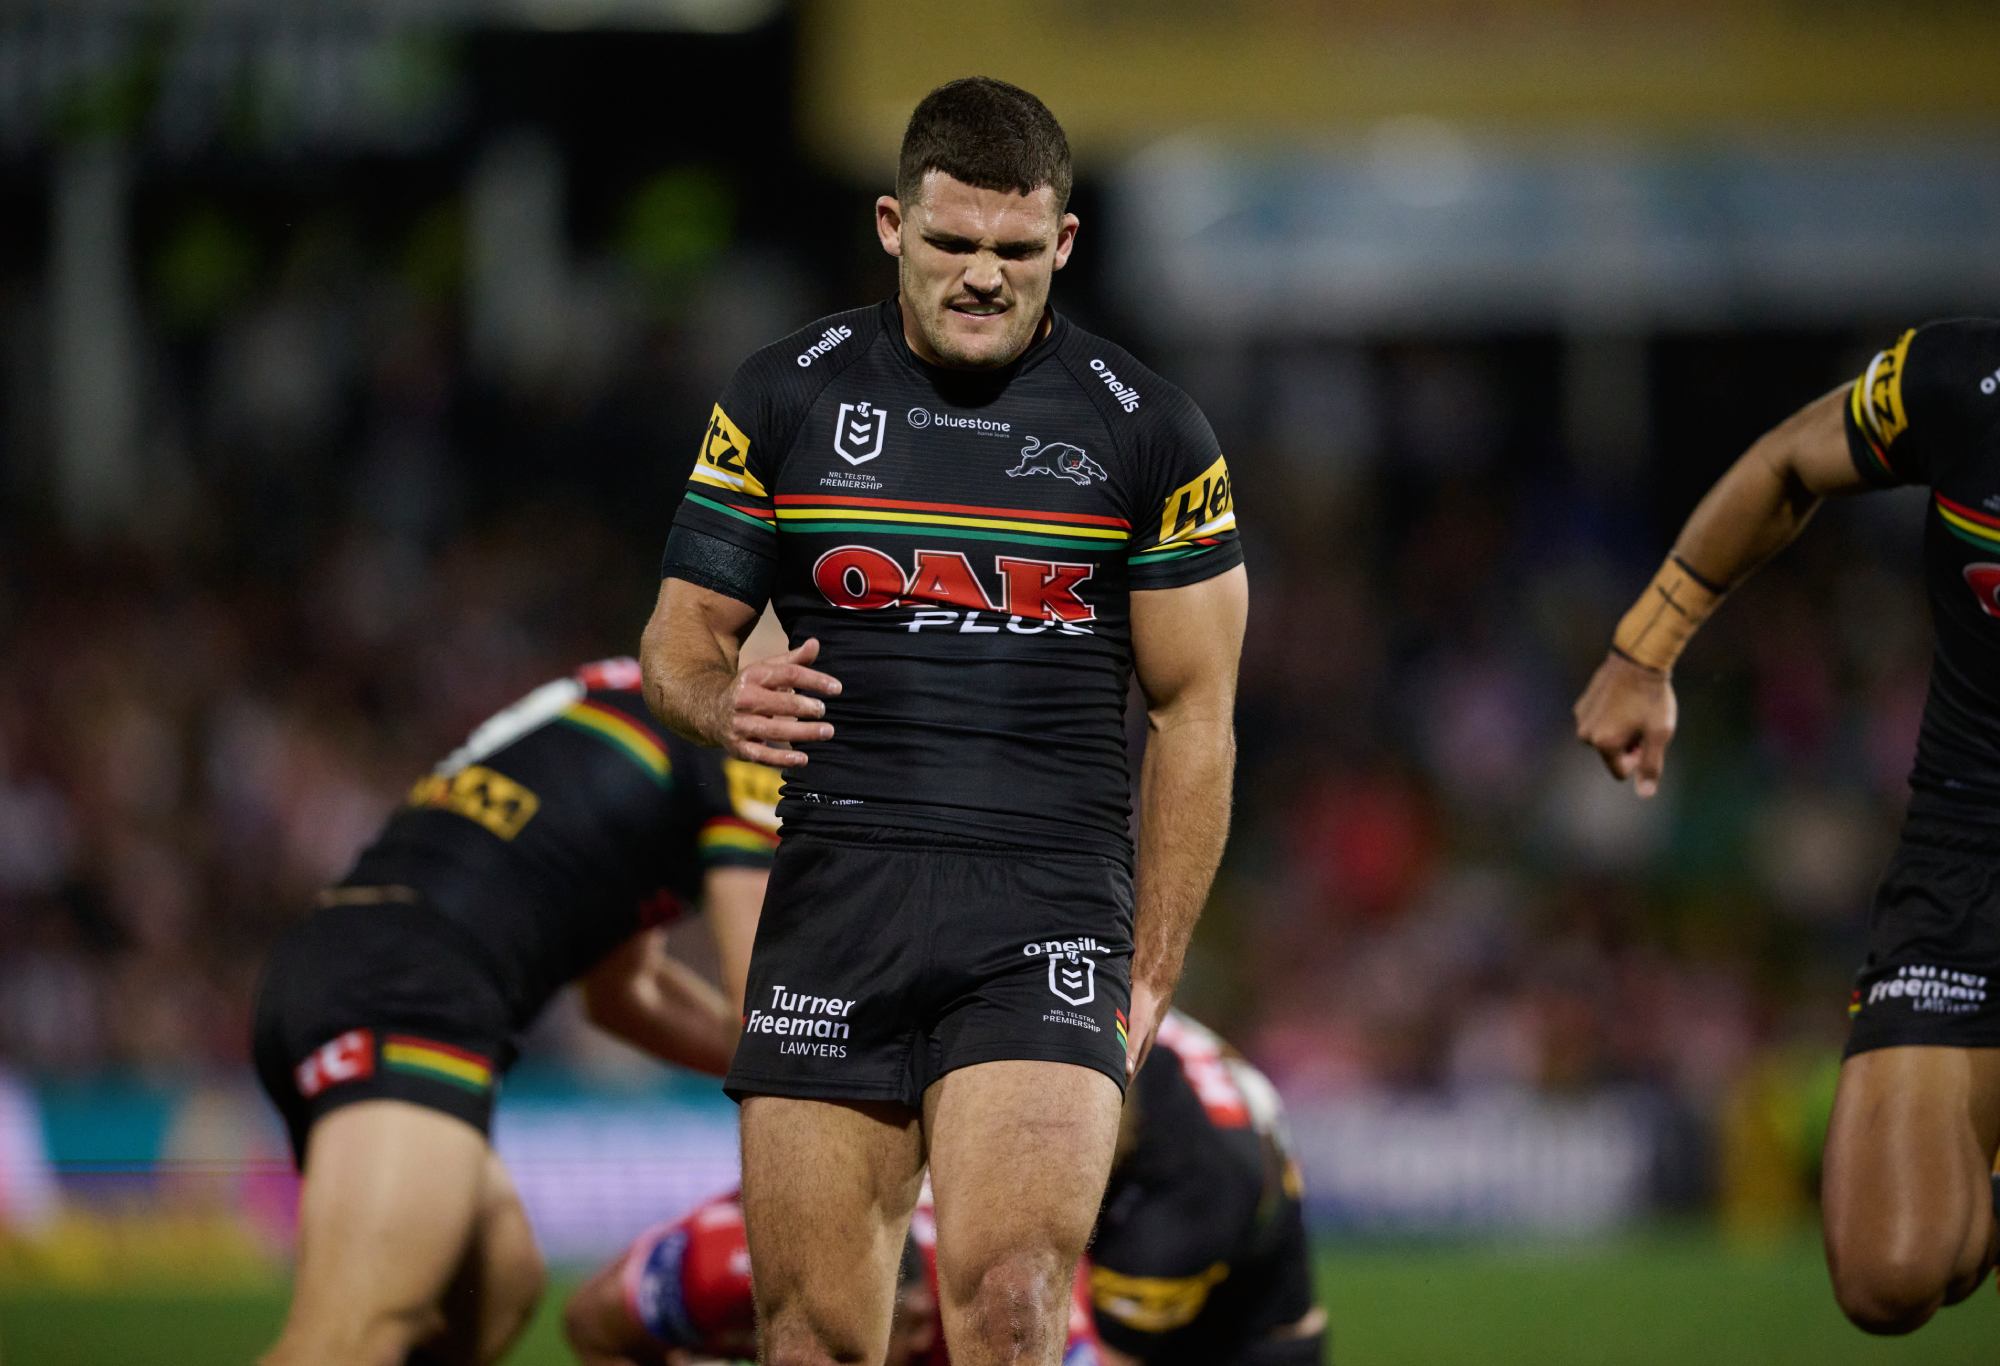 PENRITH, AUSTRALIA - JUNE 04: Nathan Cleary of the Panthers clutches his leg with an injury during the round 14 NRL match between Penrith Panthers and St George Illawarra Dragons at BlueBet Stadium on June 04, 2023 in Penrith, Australia. (Photo by Brett Hemmings/Getty Images)